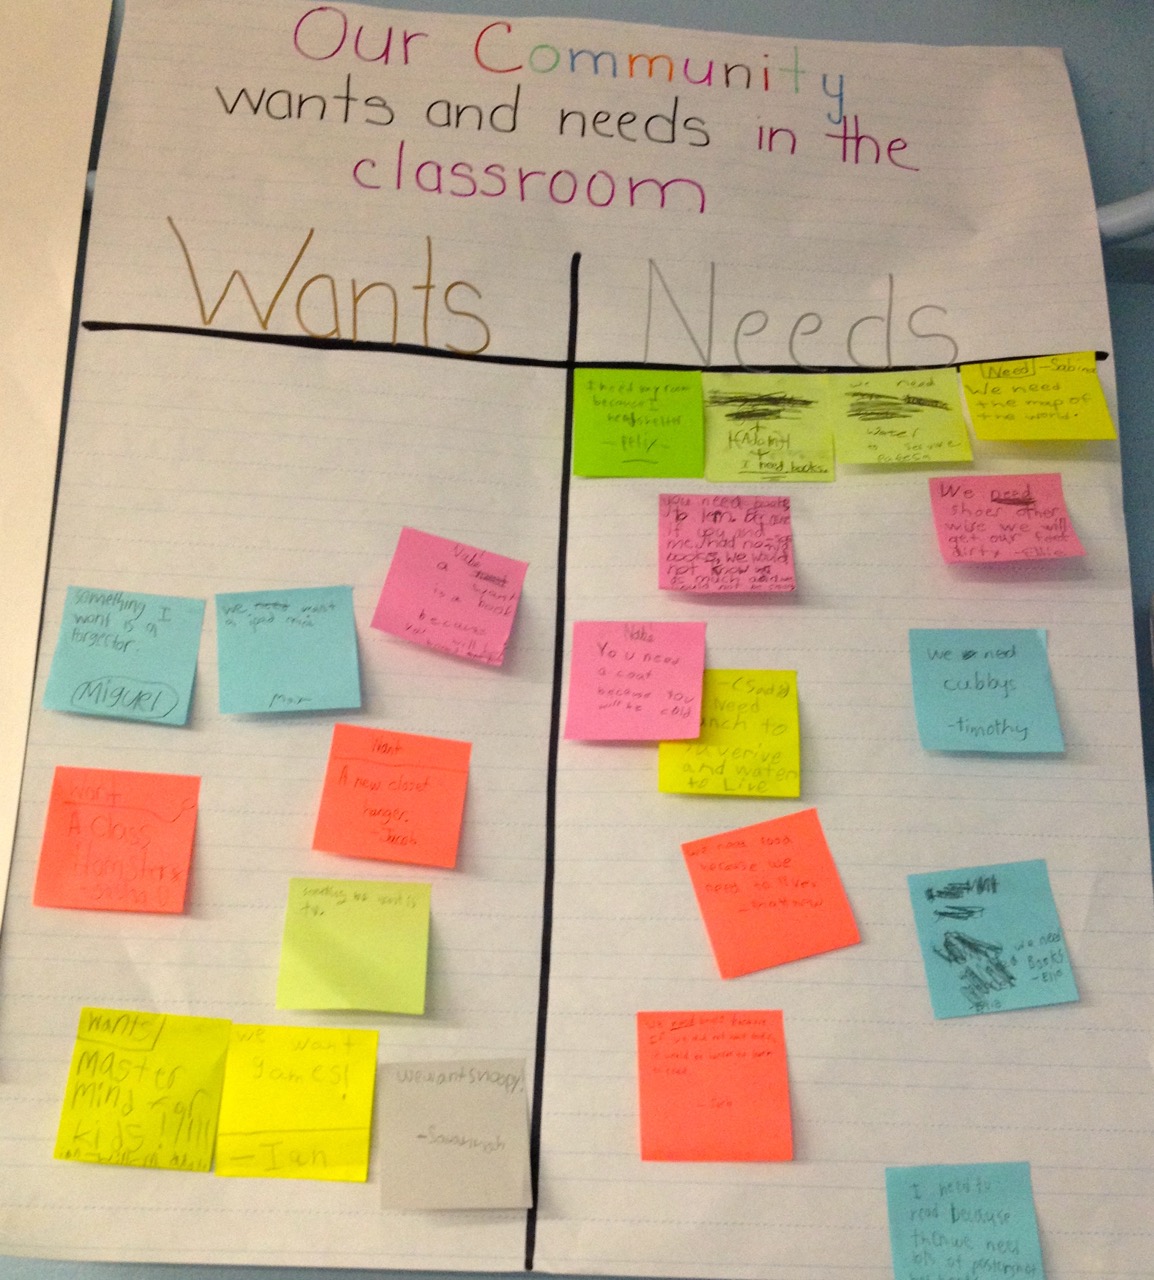 New Anchor Charts for a New Year! | Scholastic